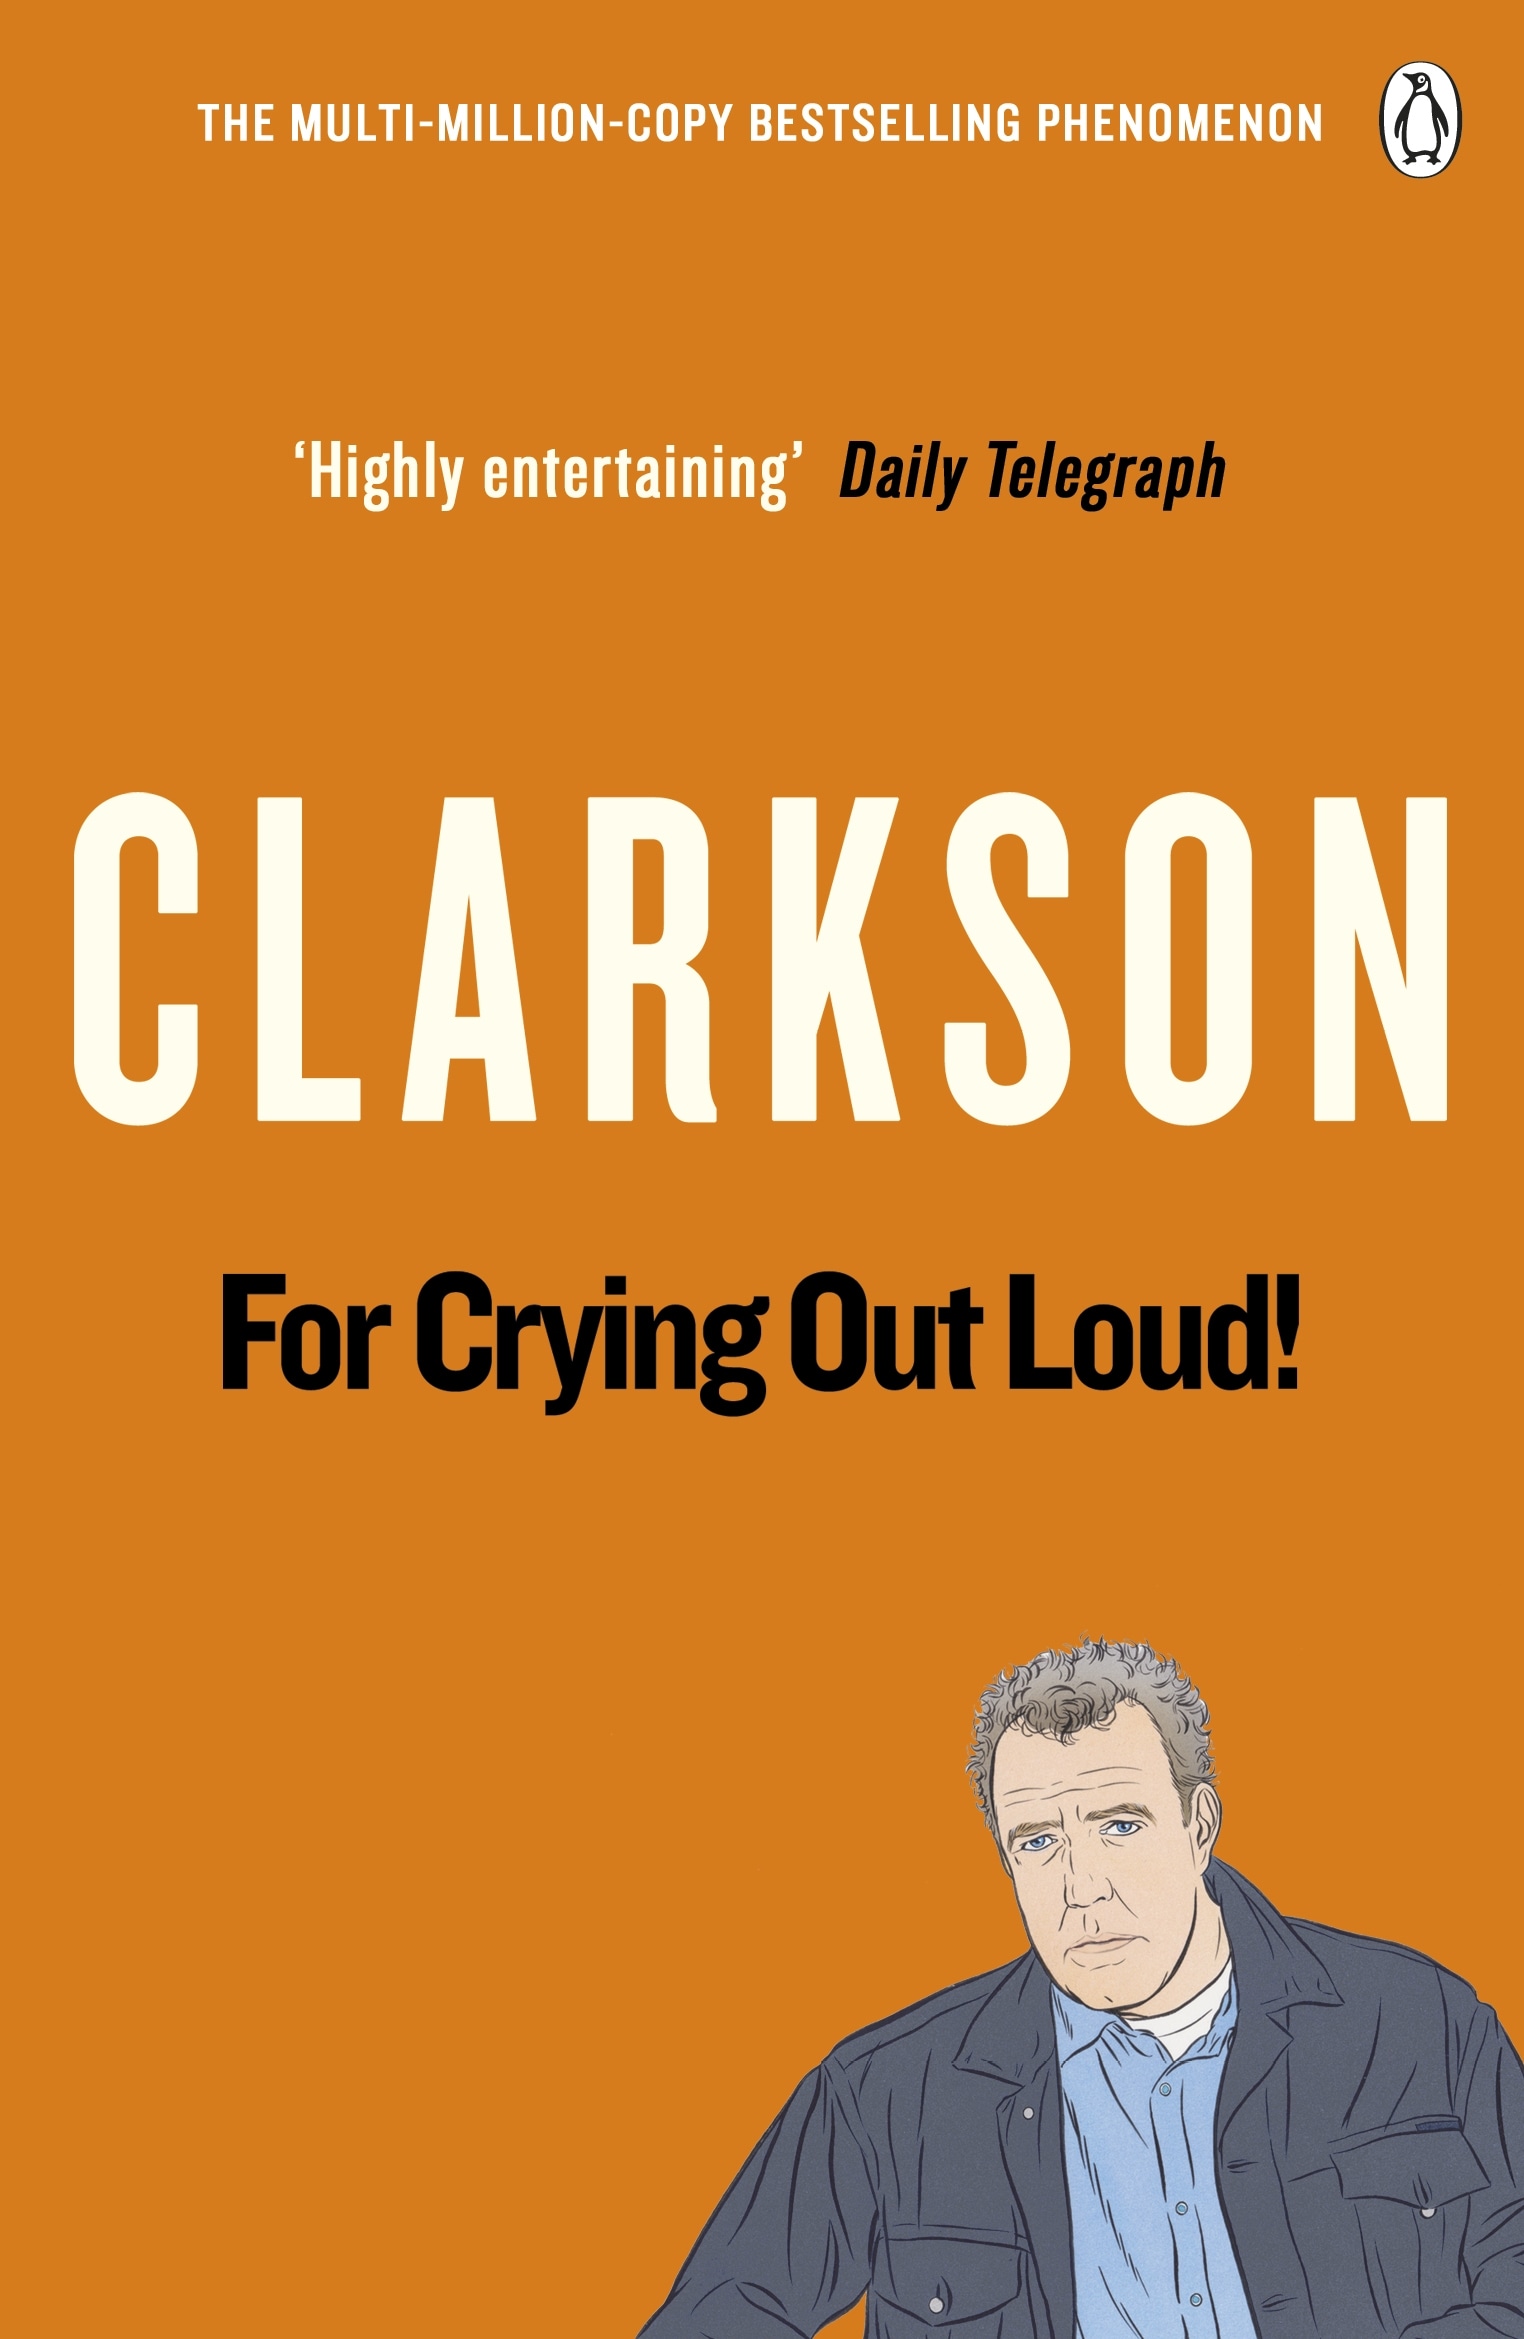 Book “For Crying Out Loud” by Jeremy Clarkson — May 14, 2009